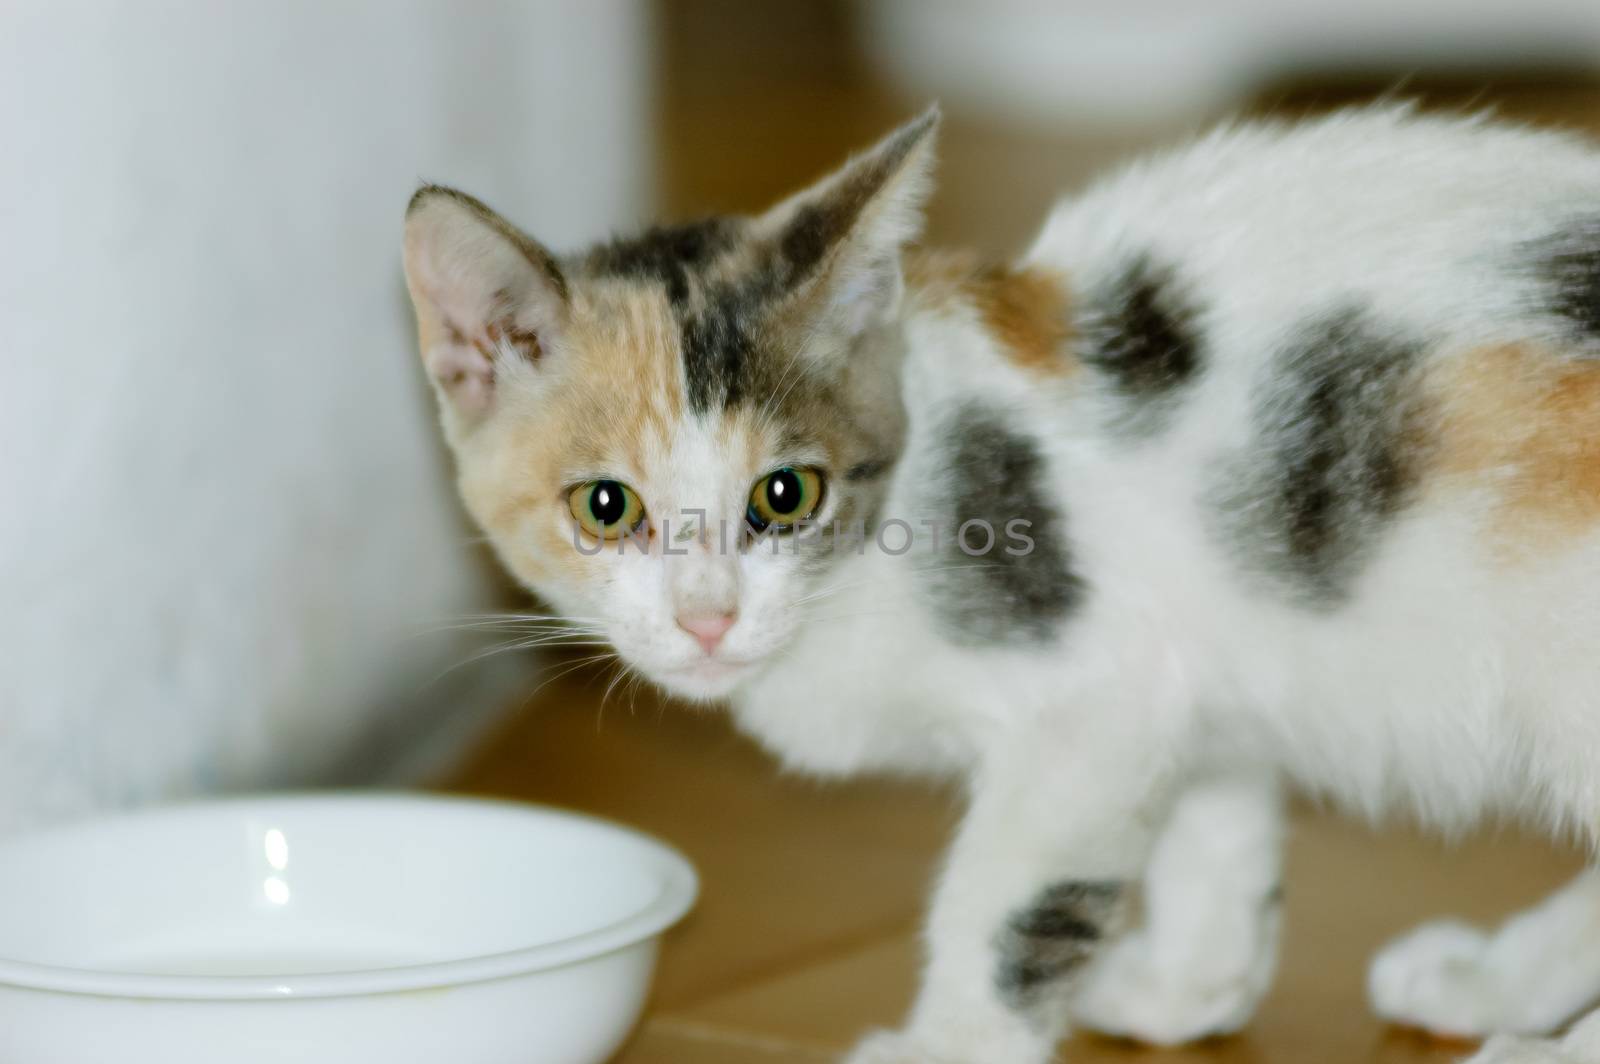 White, black and brown spotted kitten drinking milk in a little cup or bowl